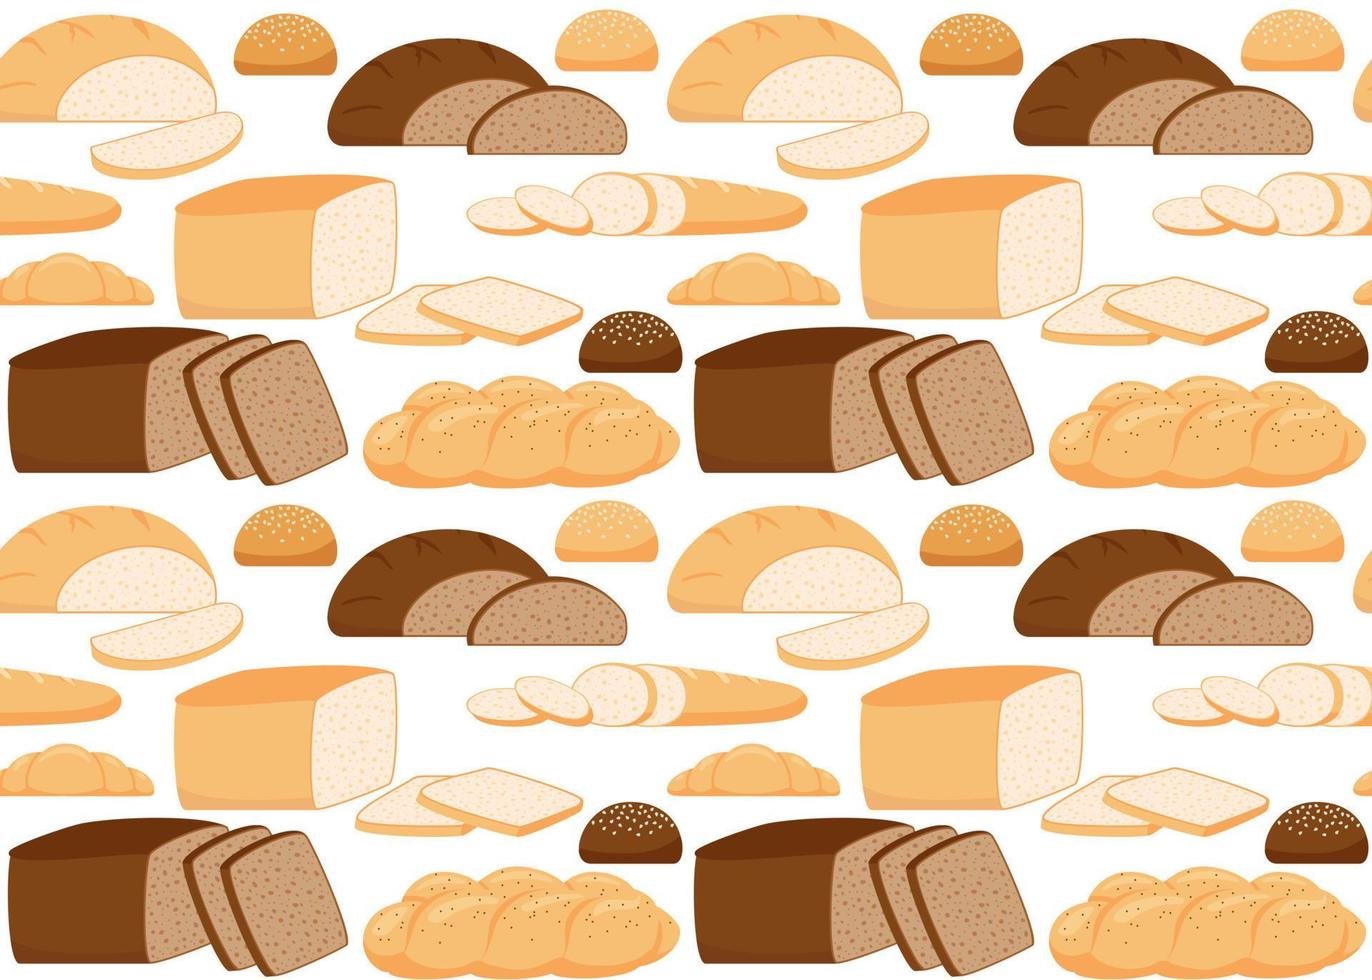 Pattern from pastry bread from wheat, whole grain and rye, bakery food, bun. Seamless background with loaf, bread brick, croissant, toast bread, French baguette, challah. Vector illustration